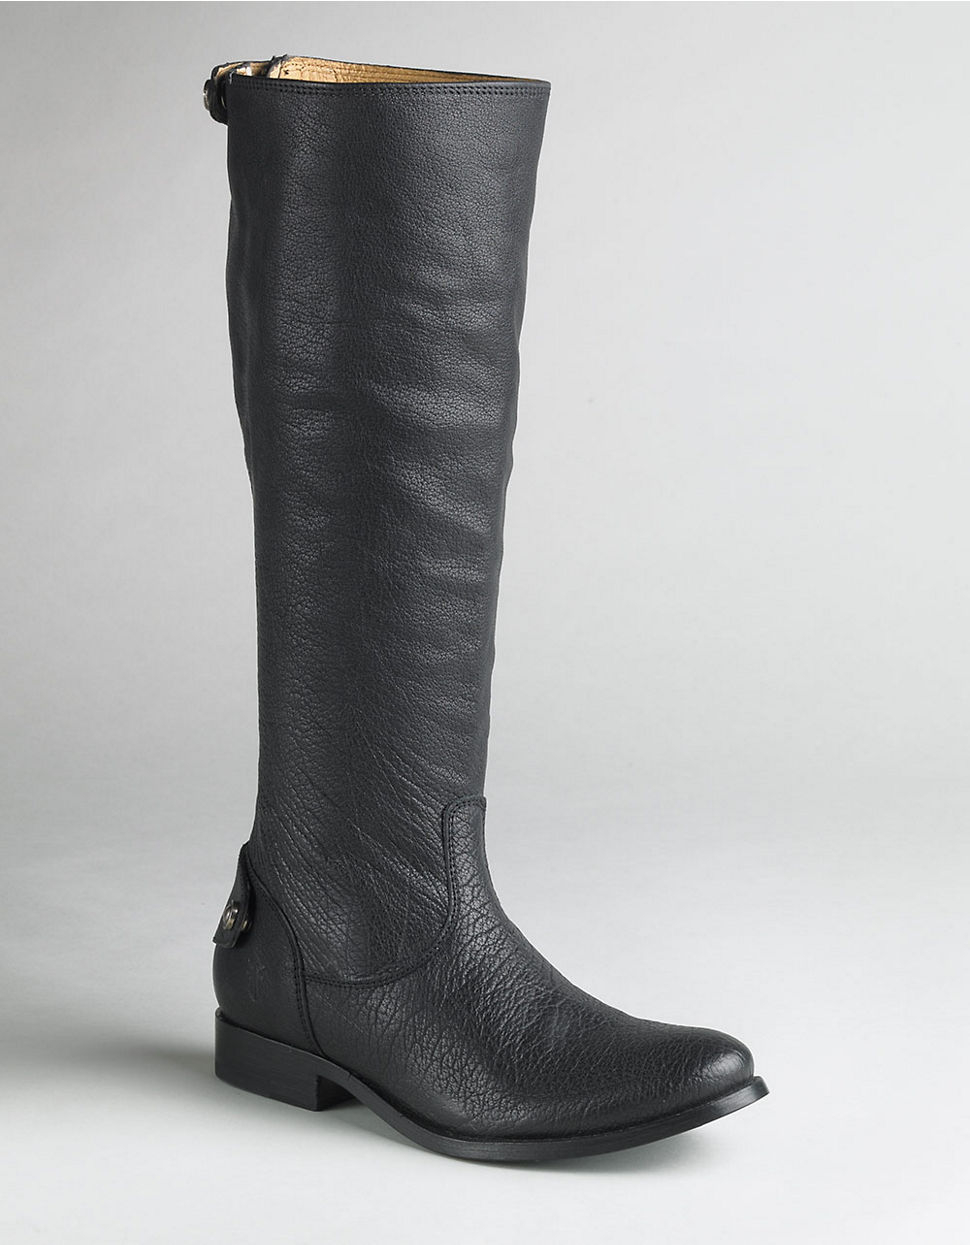 Frye Melissa Button Back-Zip Boots in Black (black leather) | Lyst